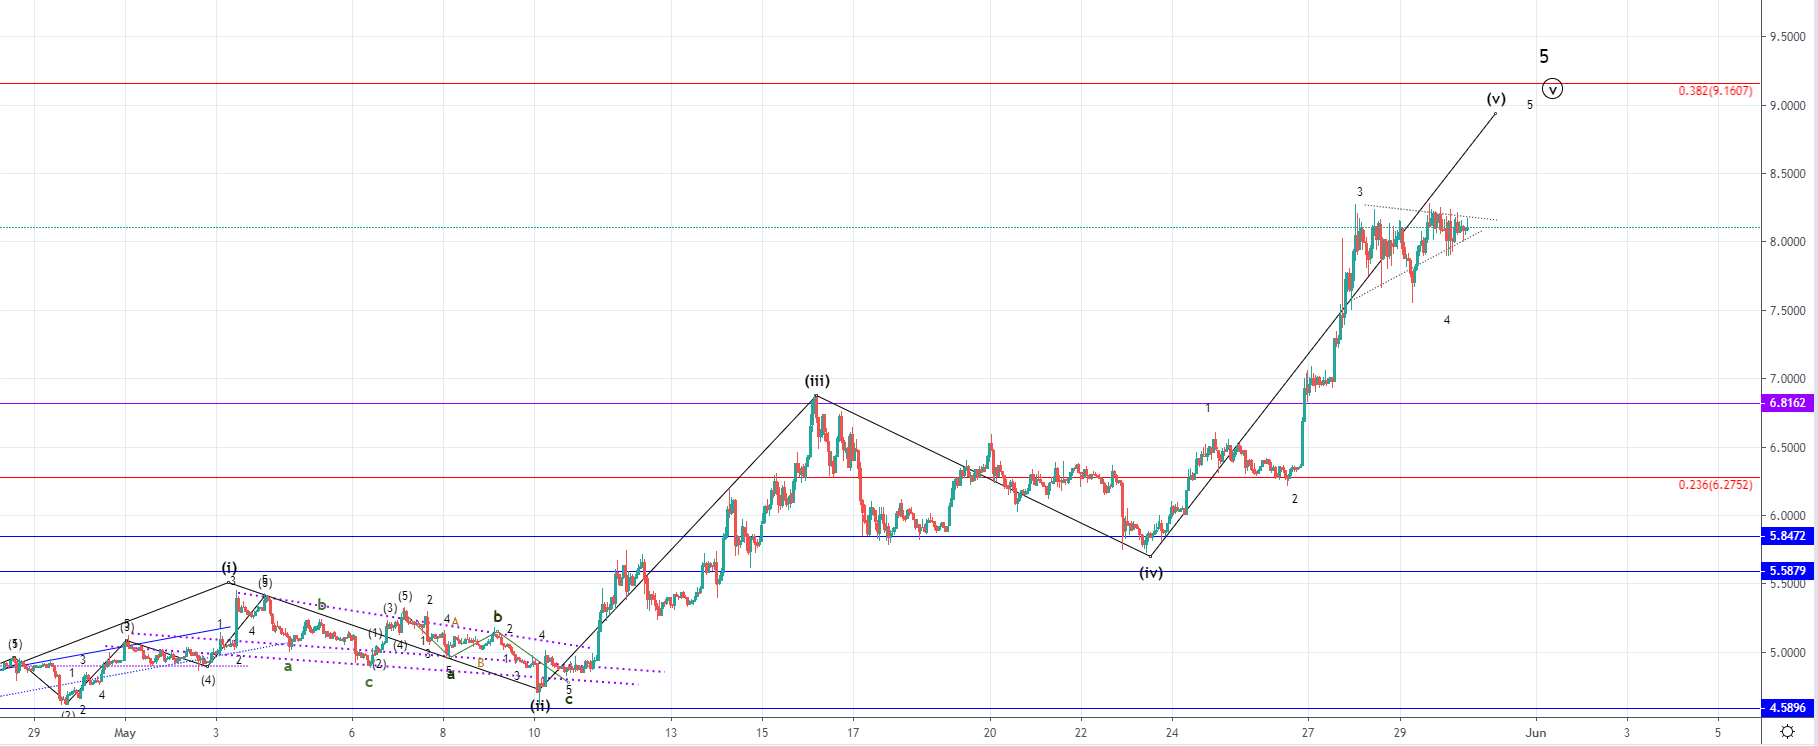 LTC/USD and EOS/USD close to completion of the ending wave, downturn shortly expected